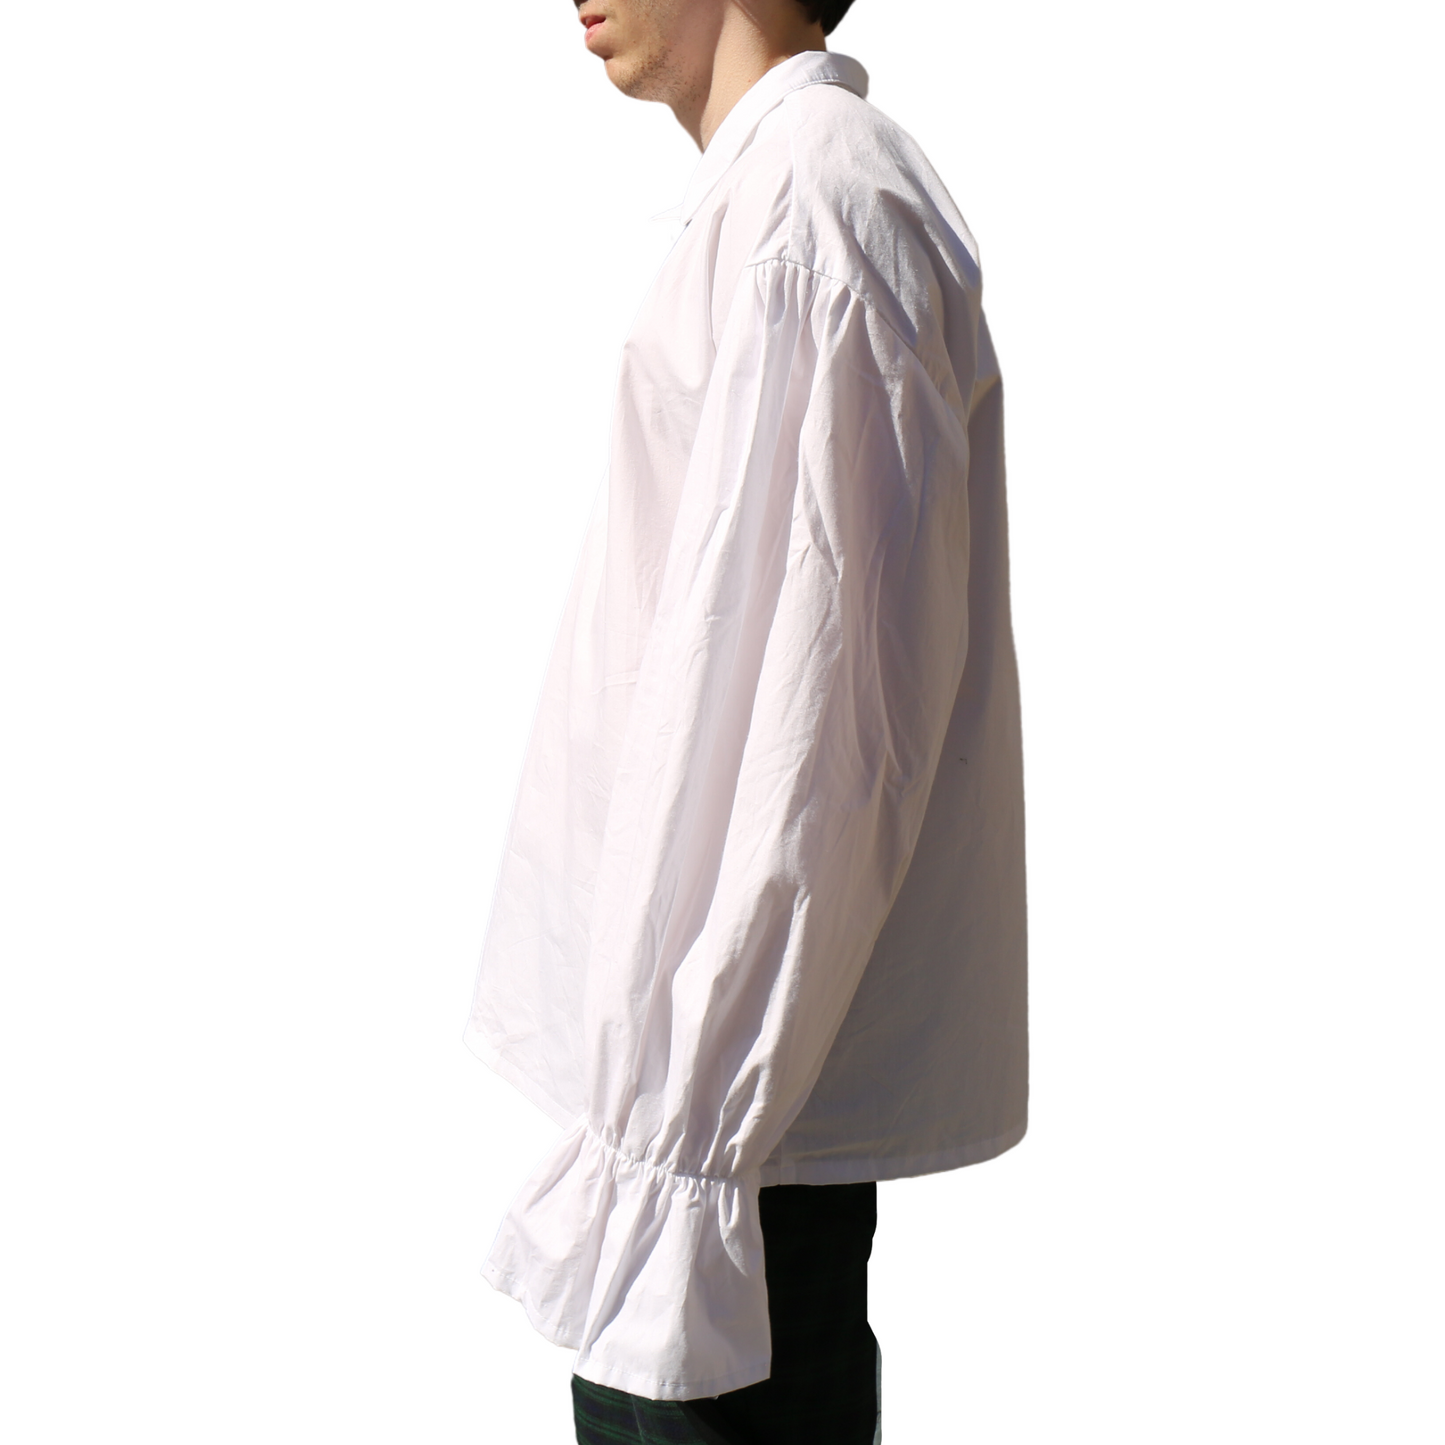 The VM Button Poet Shirt with ruffle cuffs